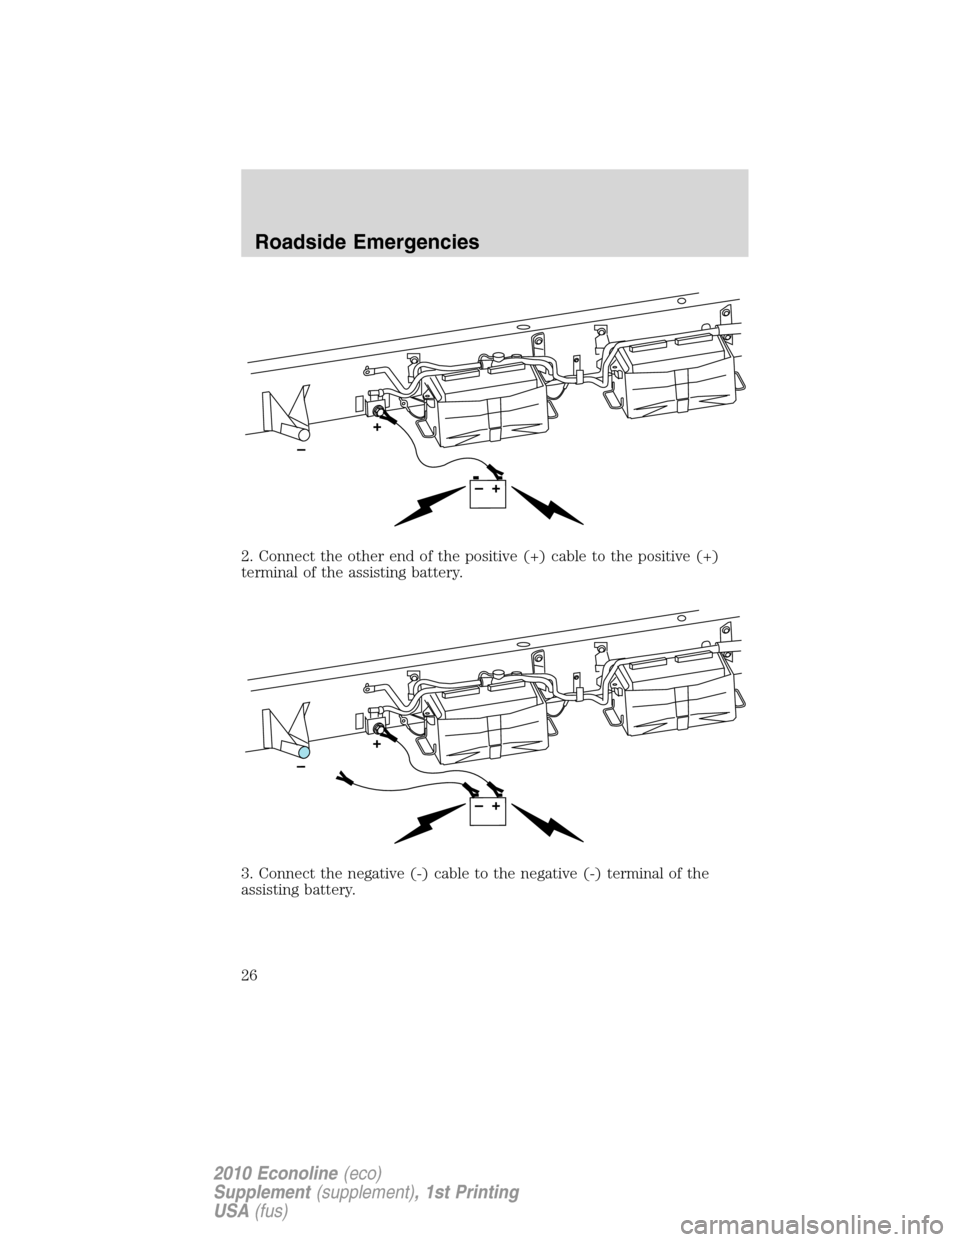 FORD SUPER DUTY 2010 2.G Diesel Supplement Manual 2. Connect the other end of the positive (+) cable to the positive (+)
terminal of the assisting battery.
3. Connect the negative (-) cable to the negative (-) terminal of the
assisting battery.
Roads